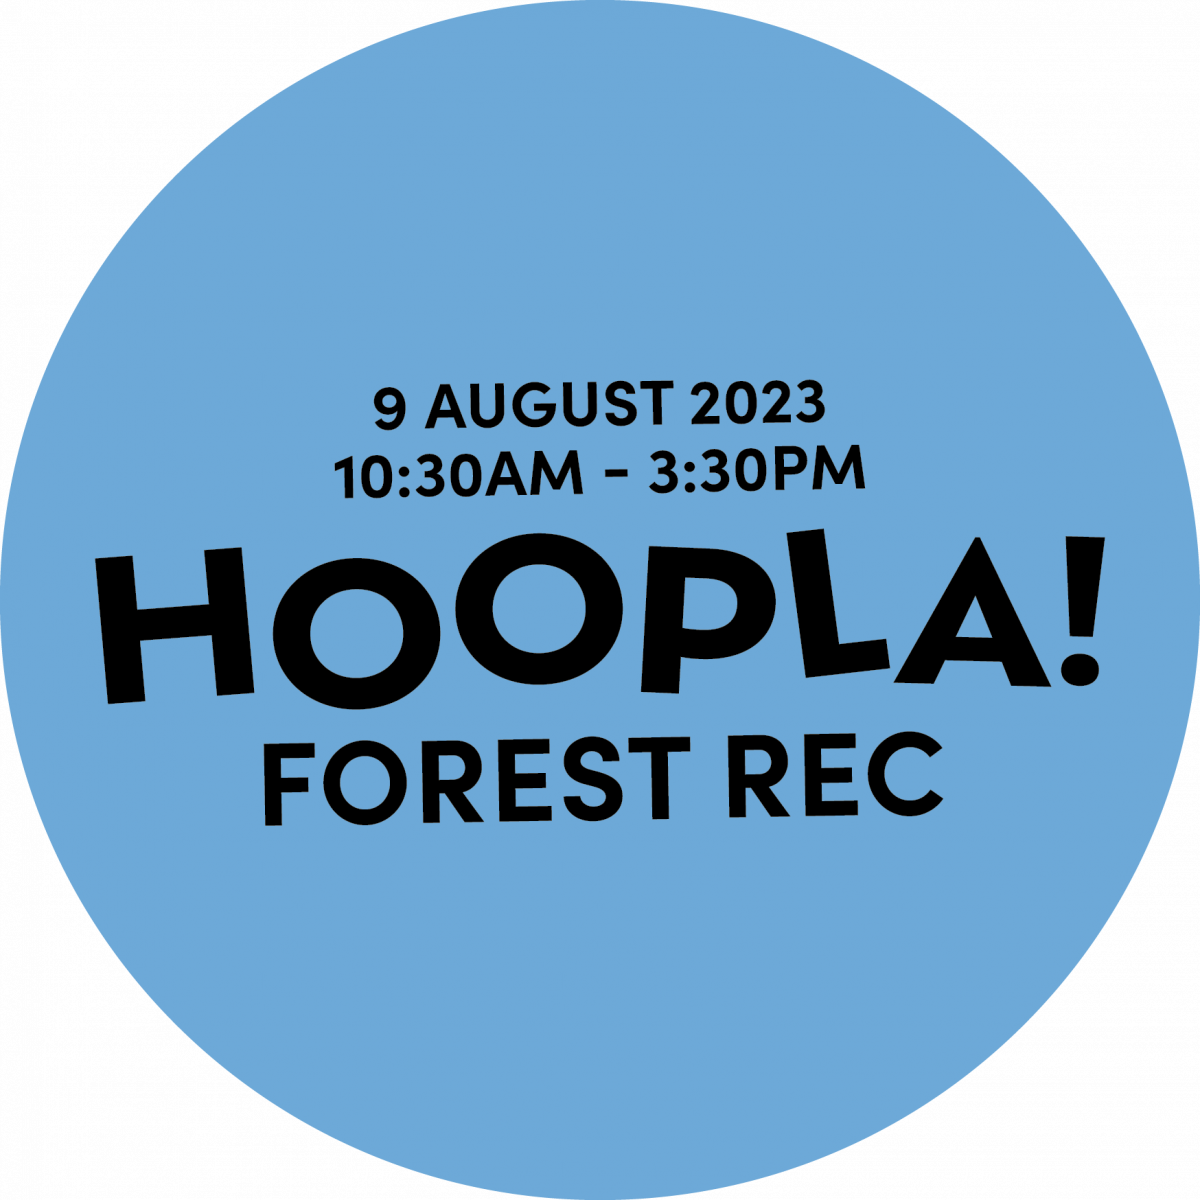 Hoopla! Forest Rec